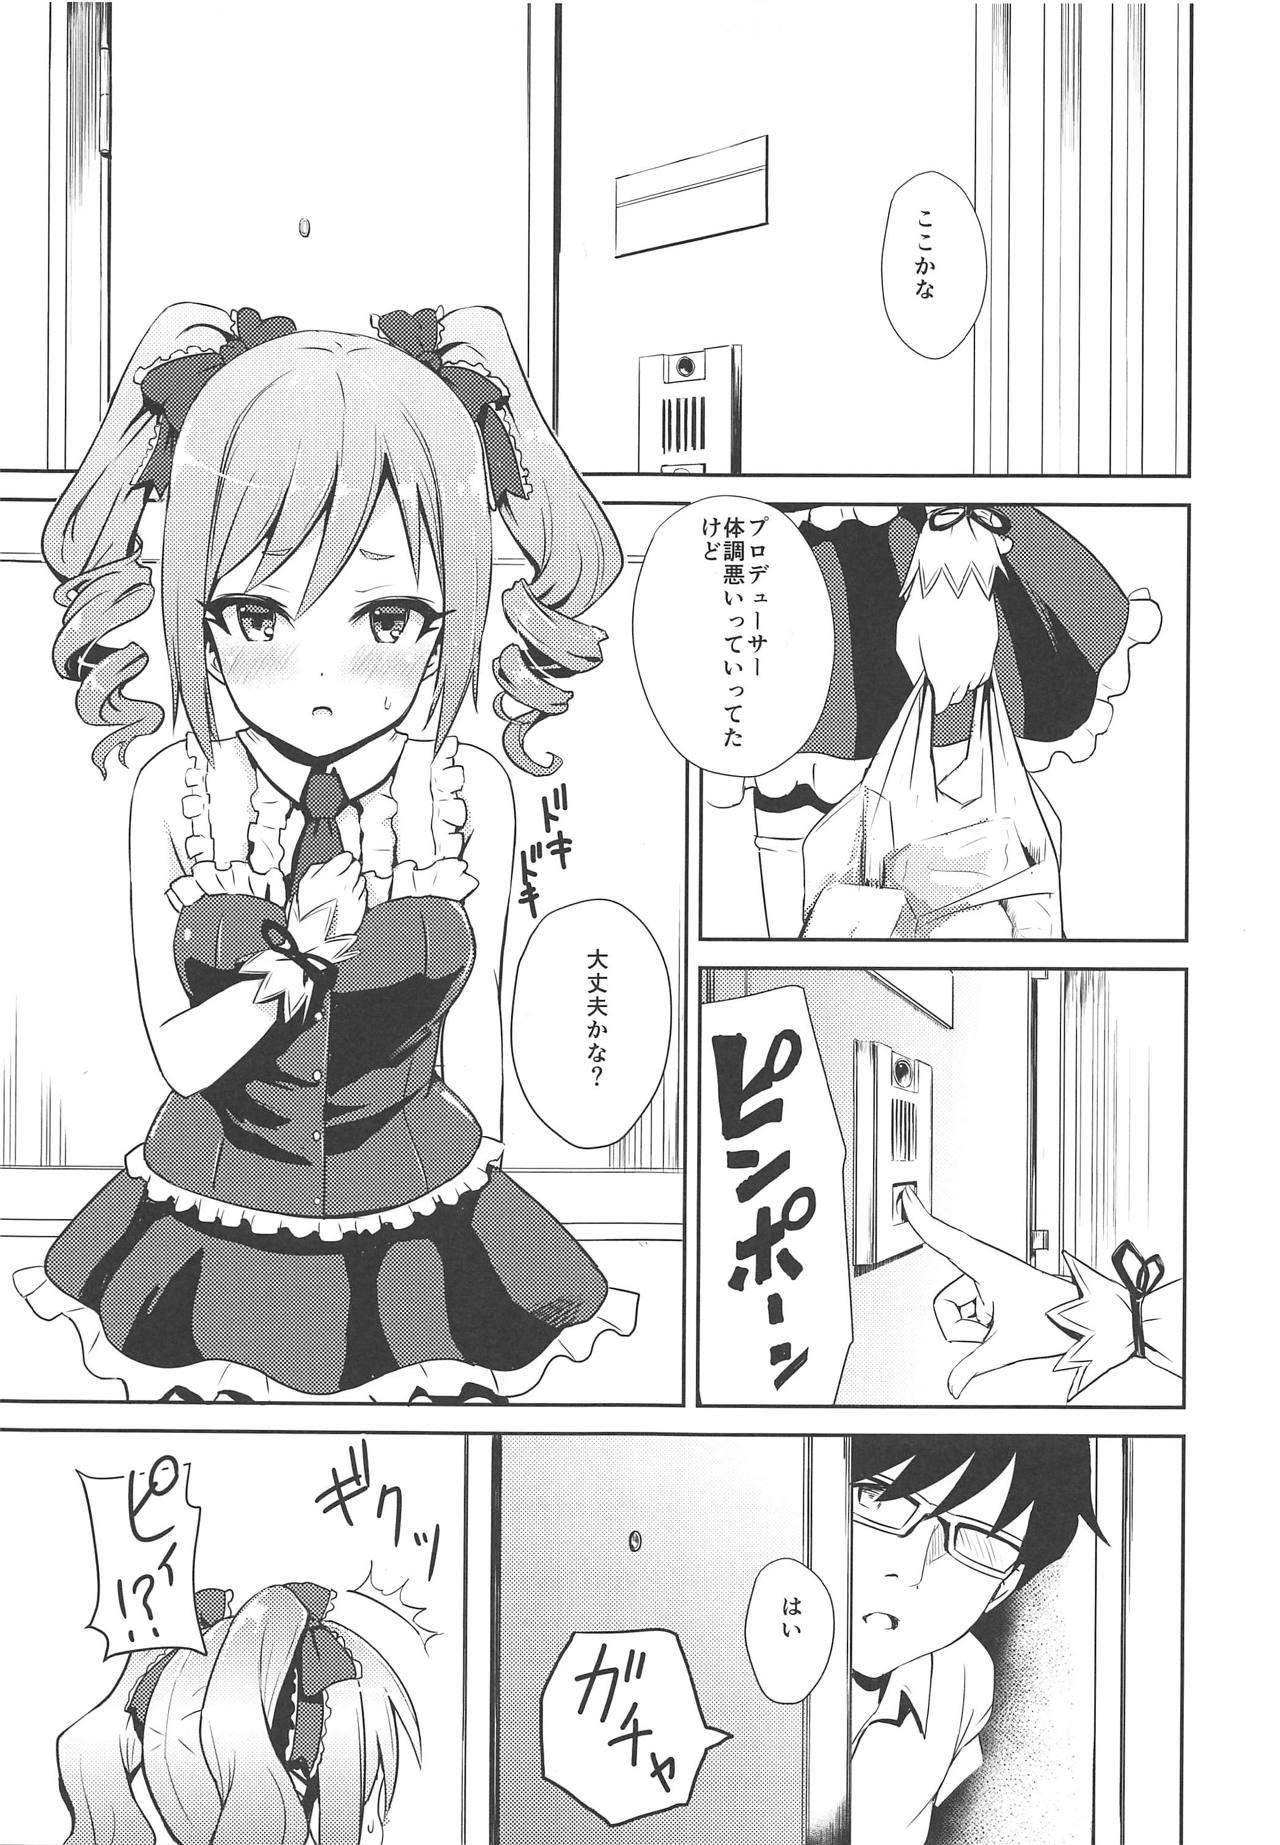 Glasses LJR2 - The idolmaster Maid - Page 4